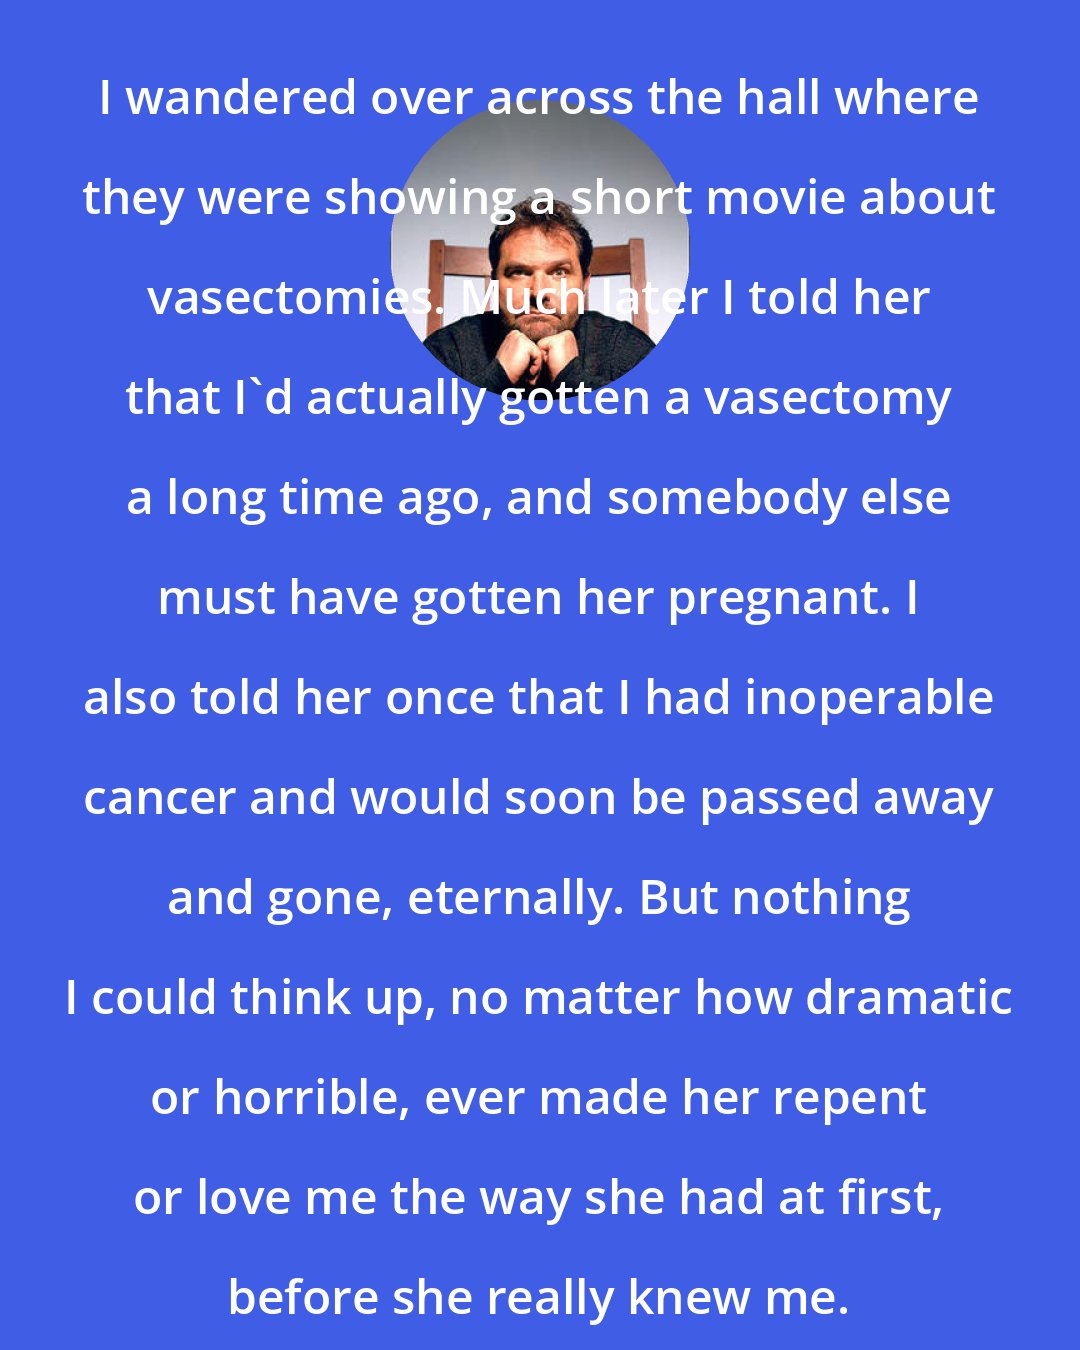 Denis Johnson: I wandered over across the hall where they were showing a short movie about vasectomies. Much later I told her that I'd actually gotten a vasectomy a long time ago, and somebody else must have gotten her pregnant. I also told her once that I had inoperable cancer and would soon be passed away and gone, eternally. But nothing I could think up, no matter how dramatic or horrible, ever made her repent or love me the way she had at first, before she really knew me.